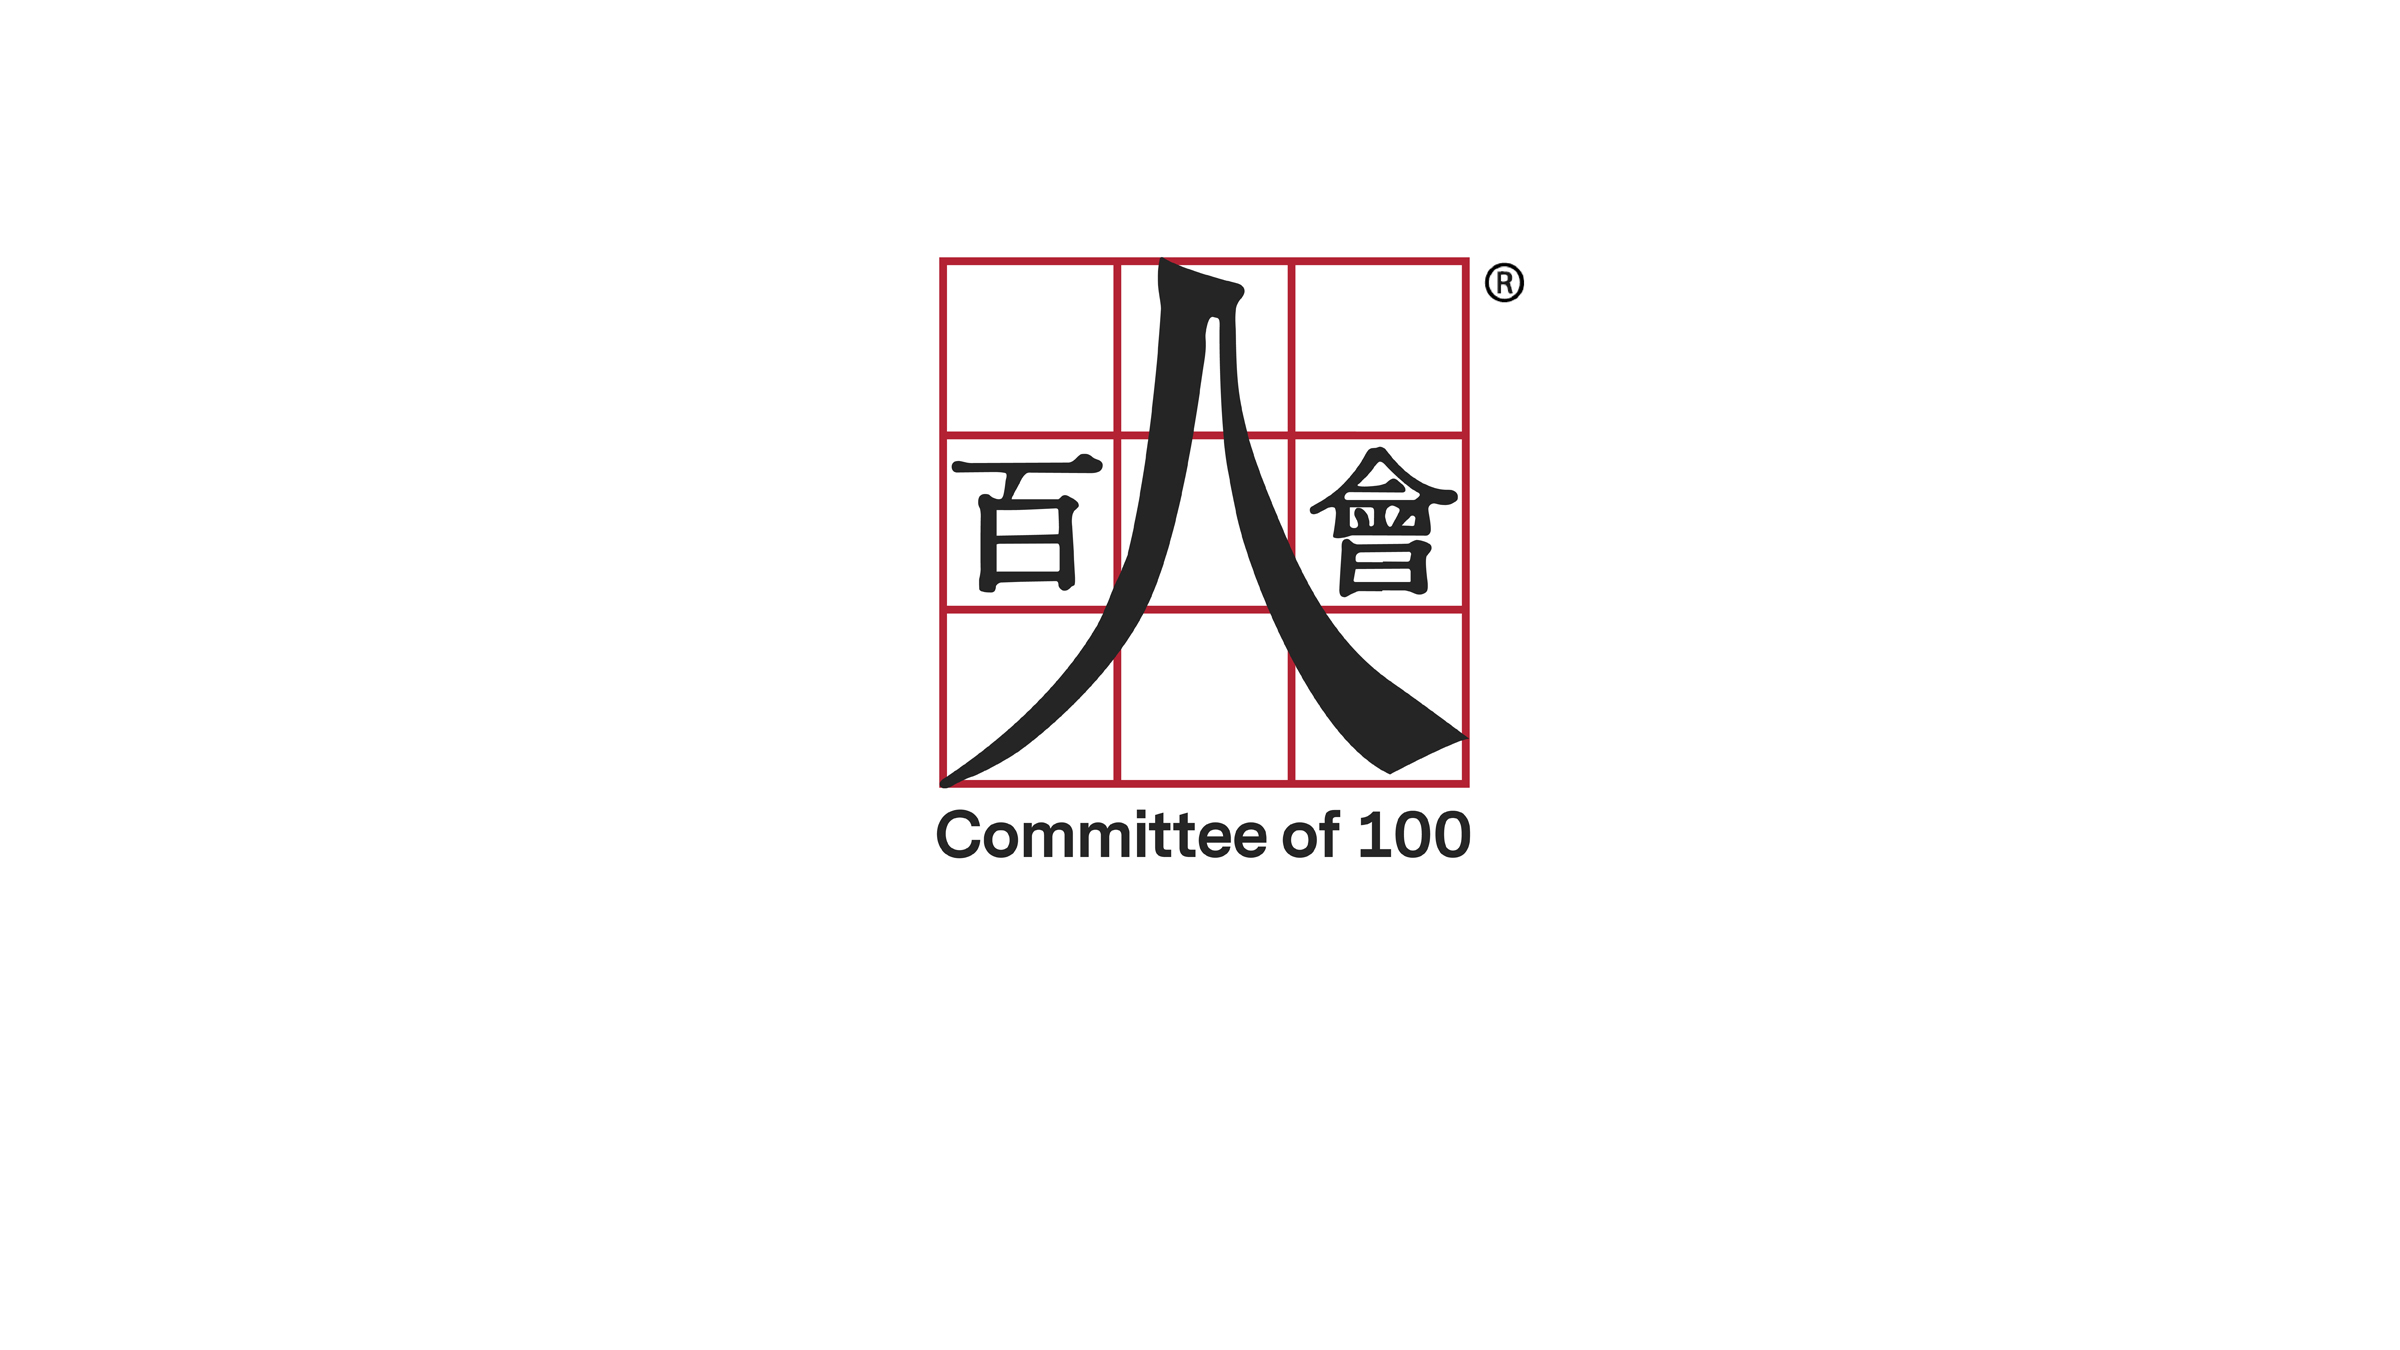 Statement by Committee of 100 on the Planned Meeting Between President Joe Biden and President Xi Jinping at the G-20 Summit